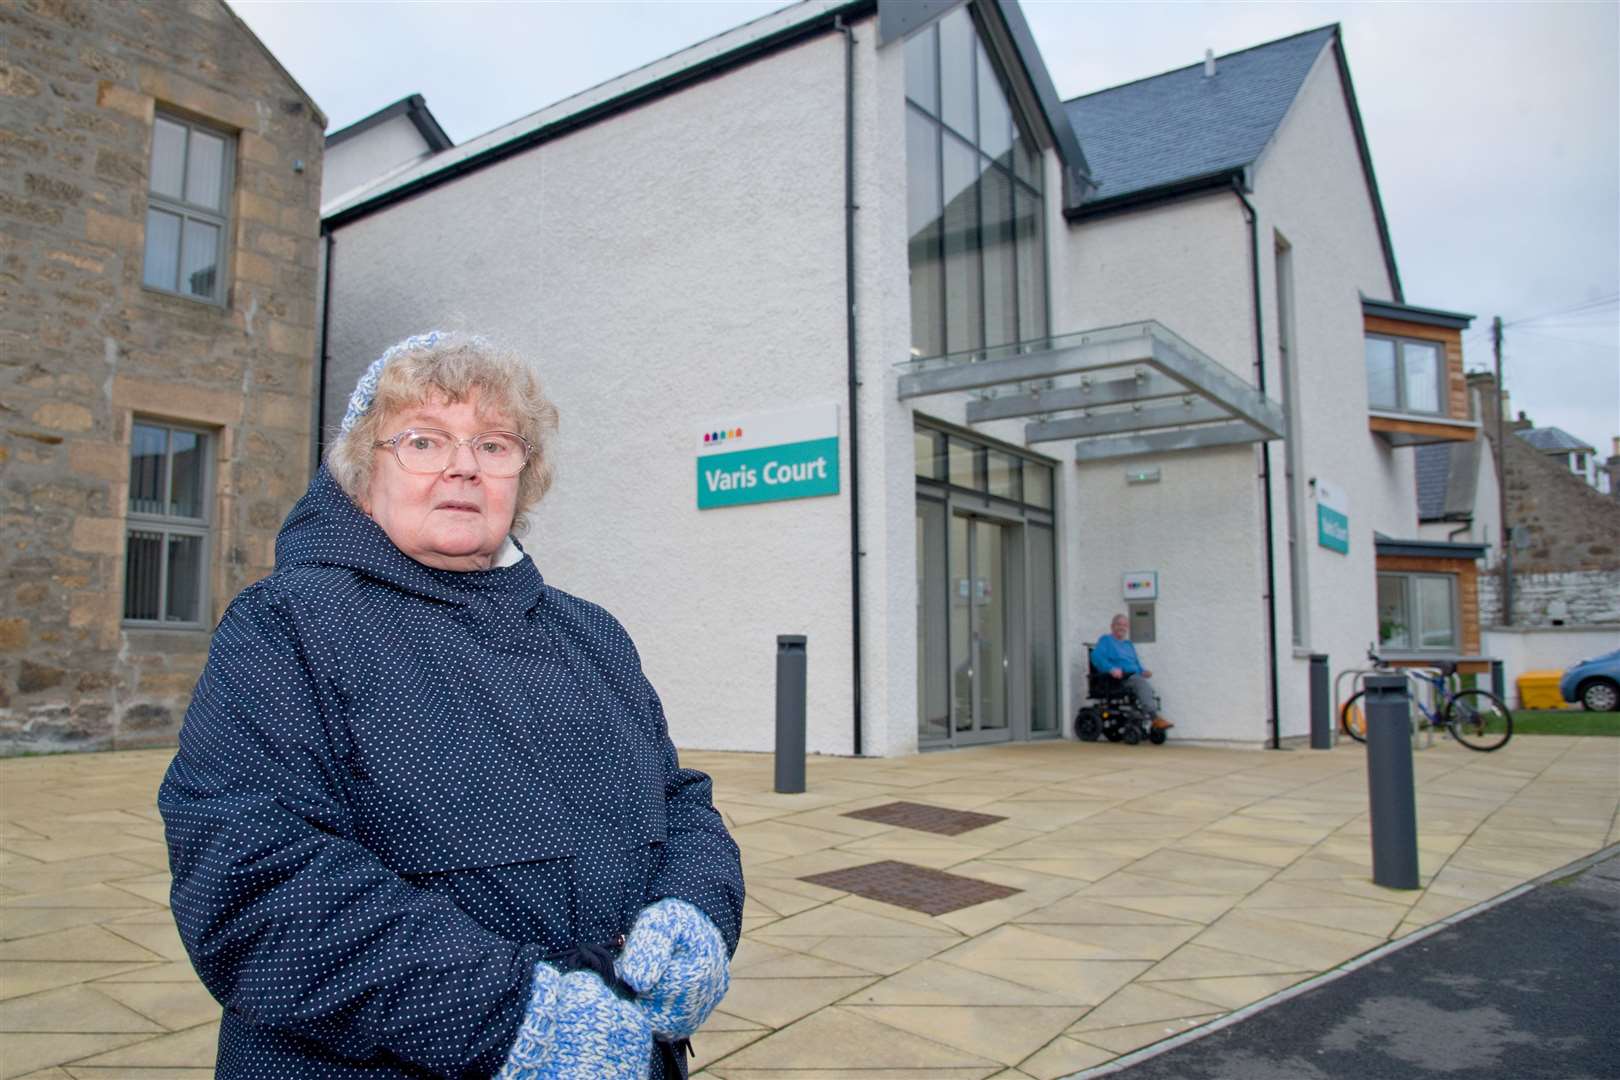 Lesley highlighted the lack of care beds at Varis Court after Leanchoil Hospital closed in the Gazette.